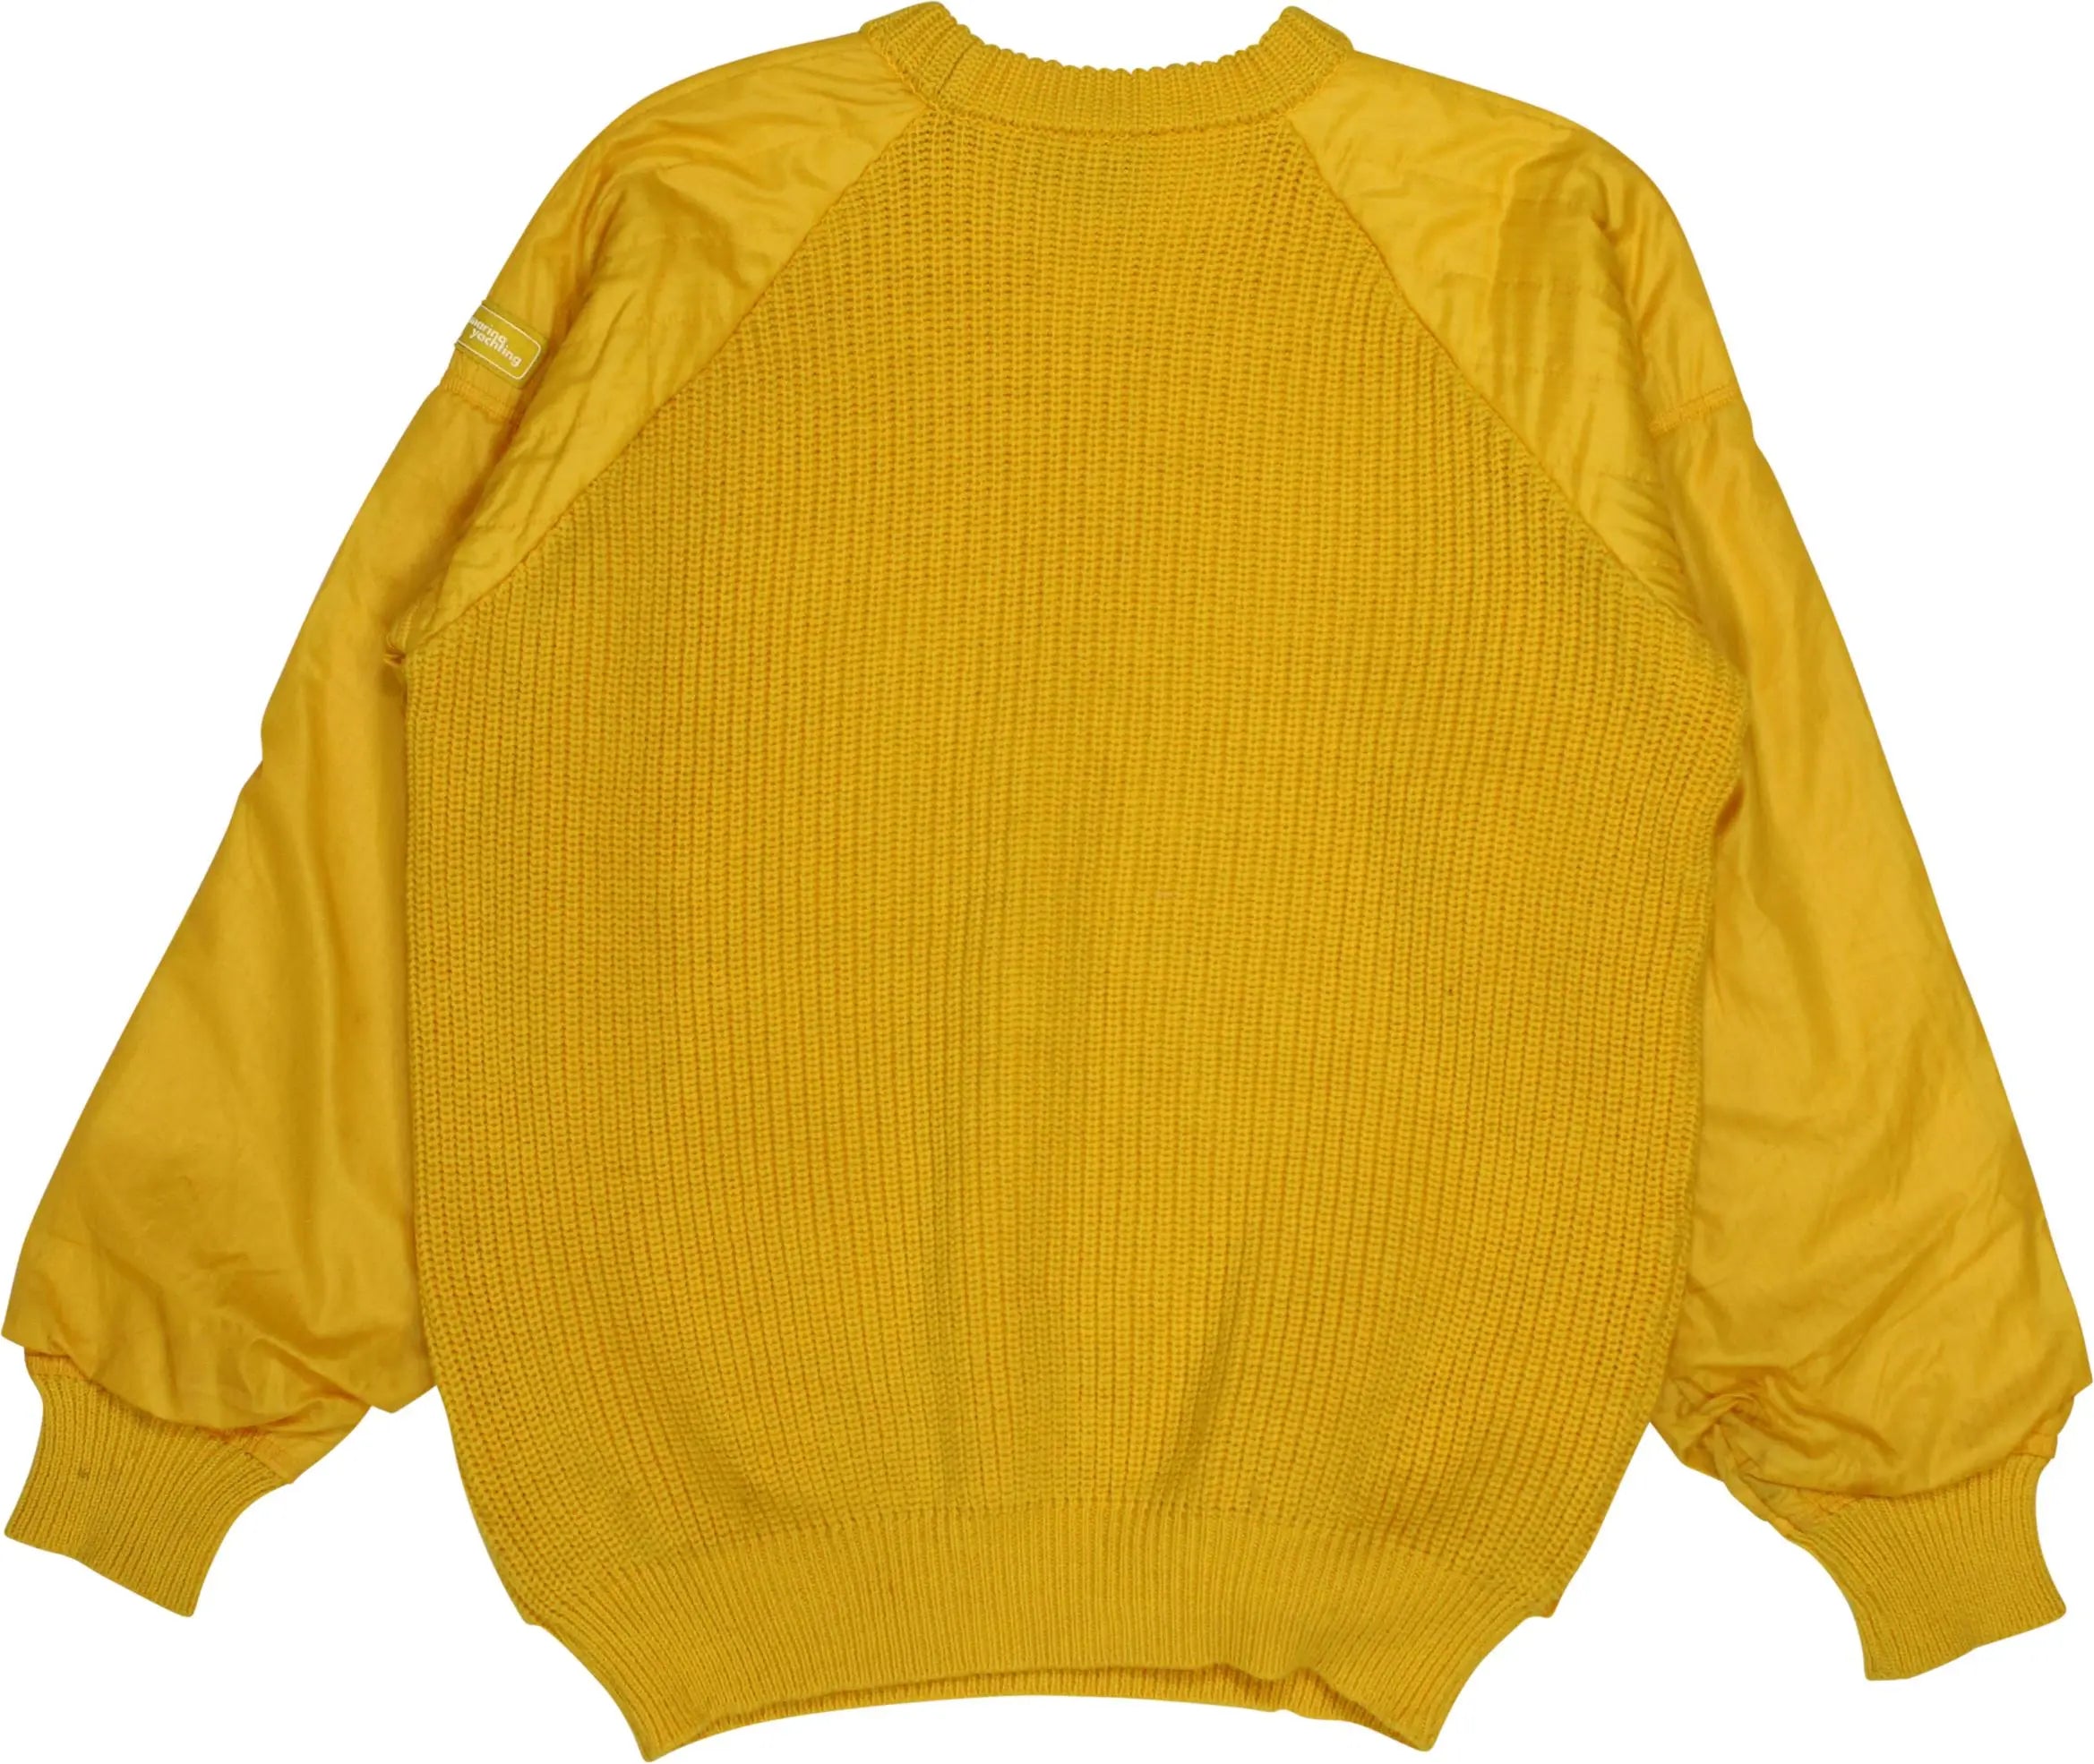 Marina Yachting - Wool Jumper by Marina Yachting- ThriftTale.com - Vintage and second handclothing